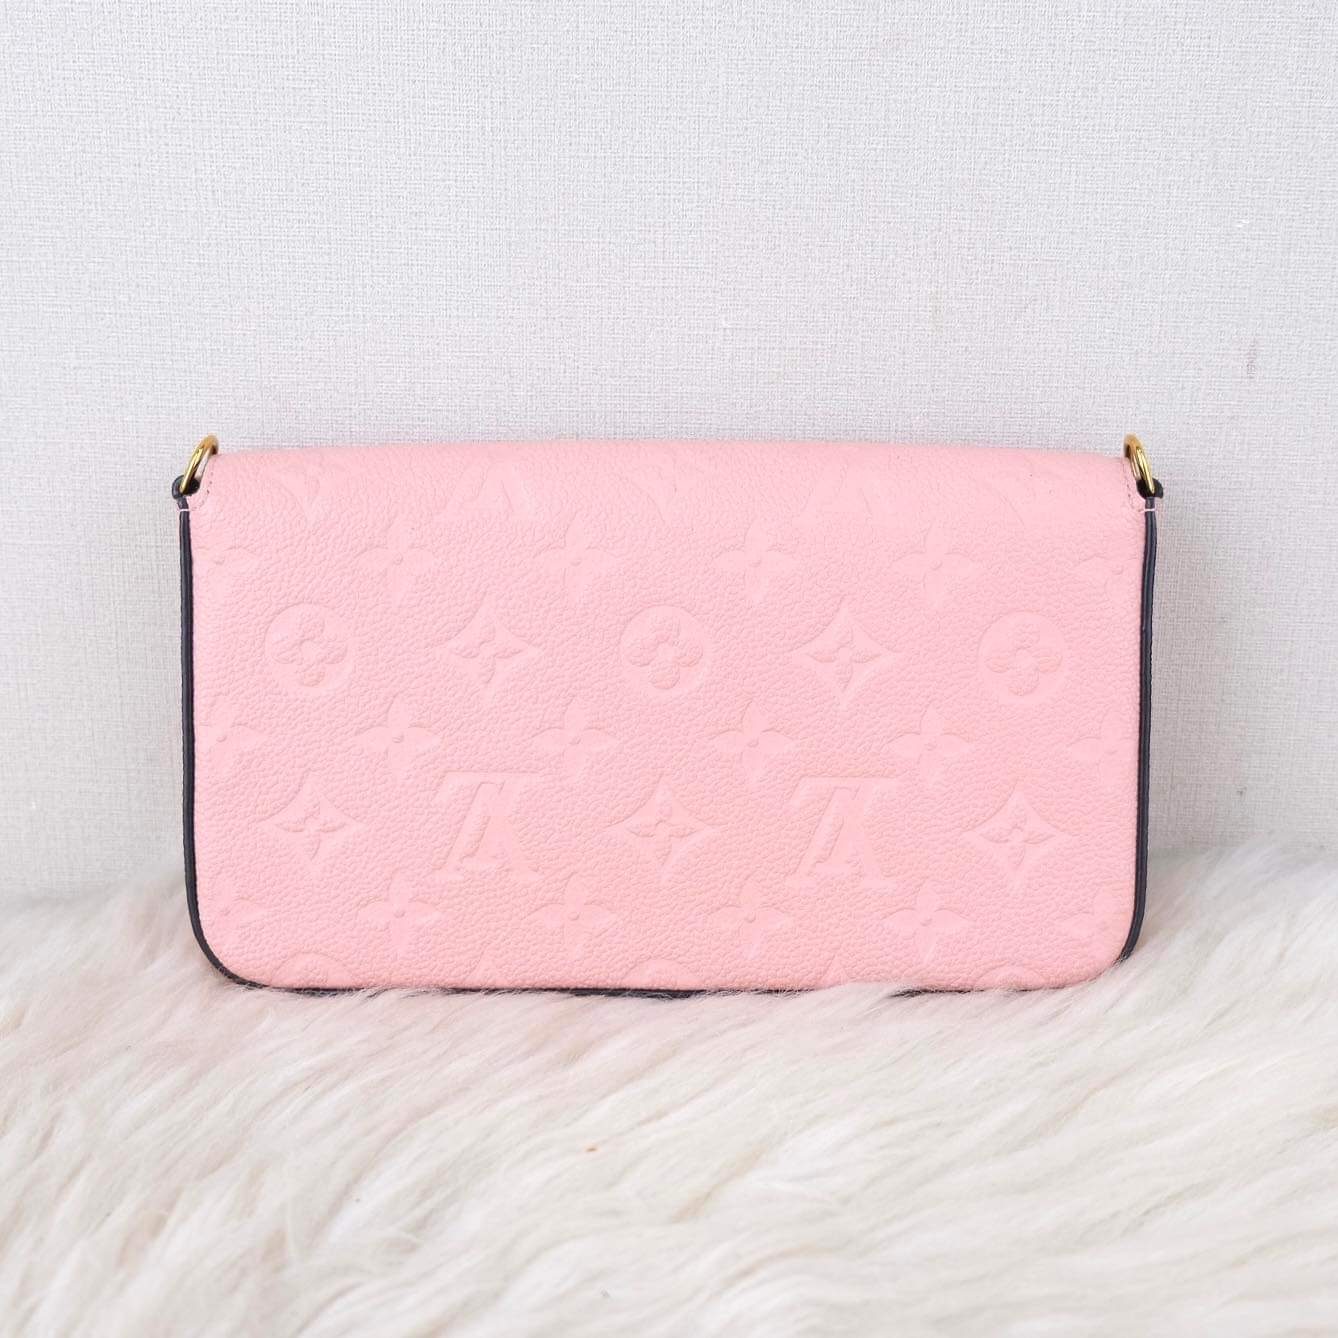 Authentic Louis Vuitton Vernis Pochette Felicie Pink 2 removable inserts  Only